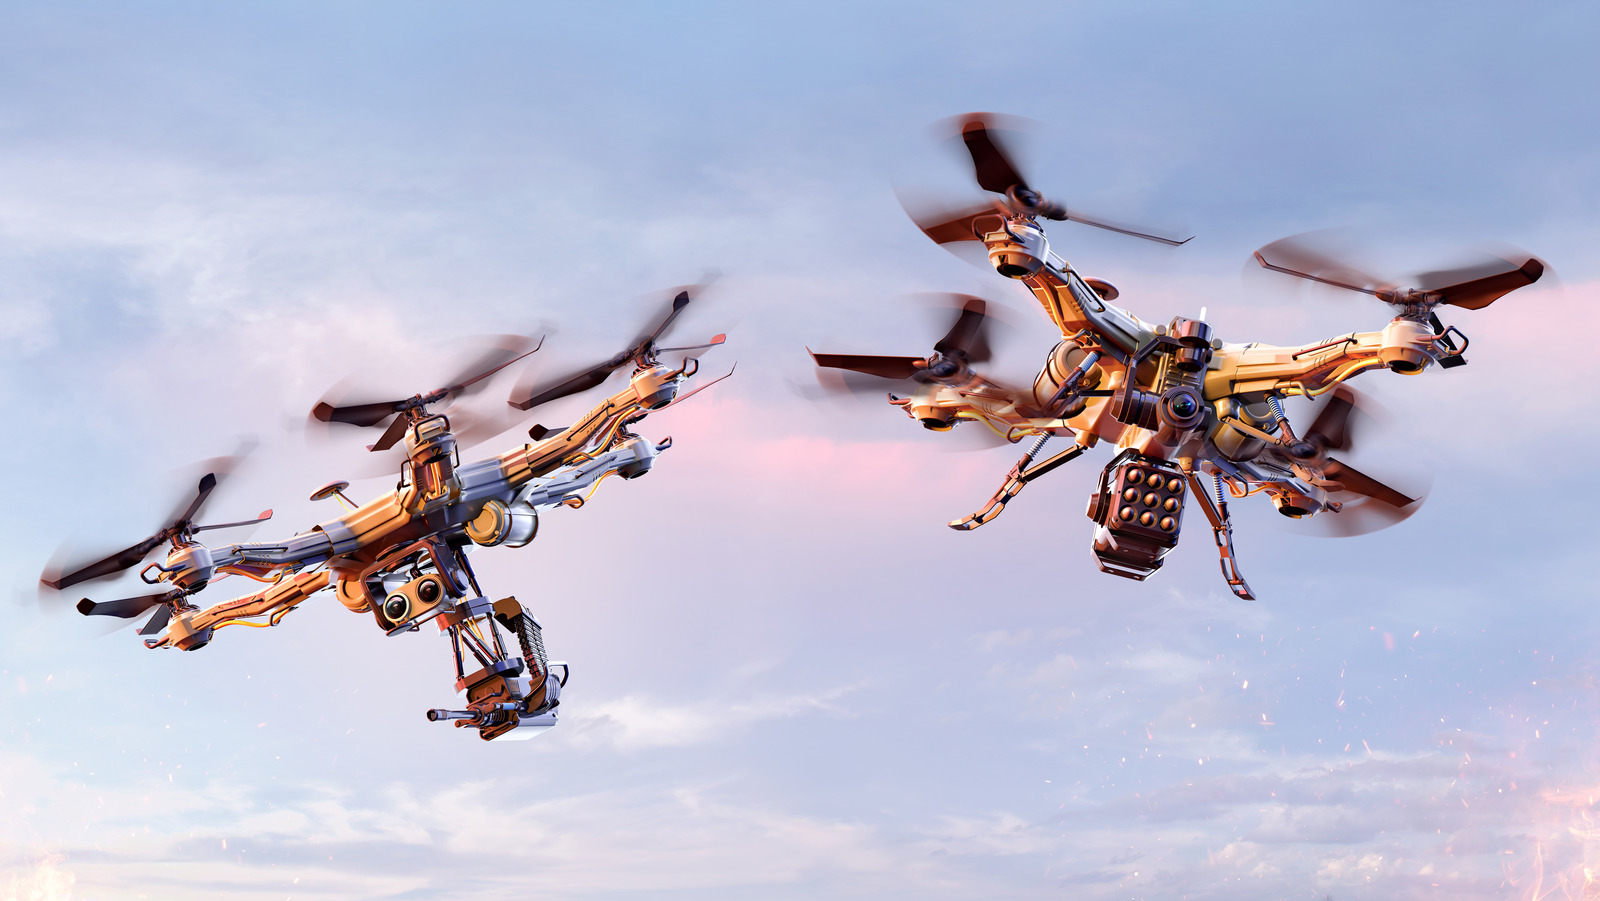 Can You Attach A Weapon To Your Drone? Here’s What The Law Says – SlashGear